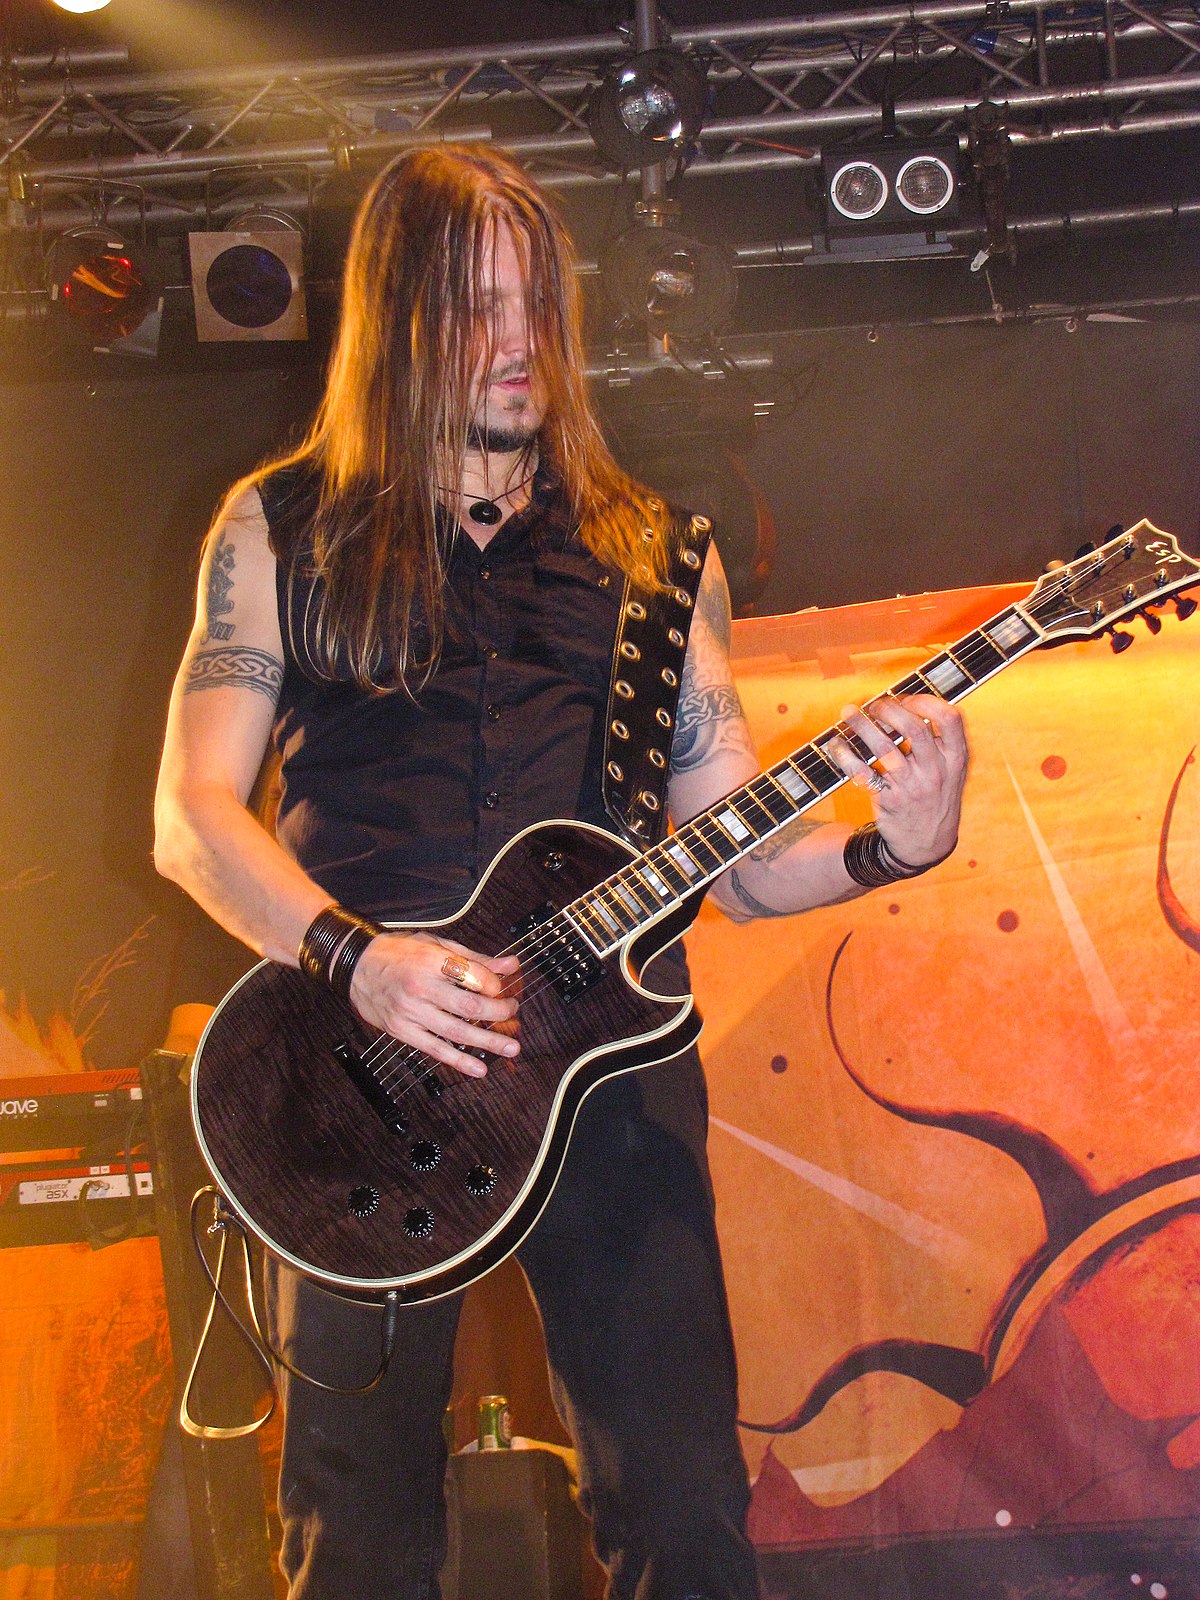 File:Amorphis live in 2010, 5.jpg - Wikimedia Commons